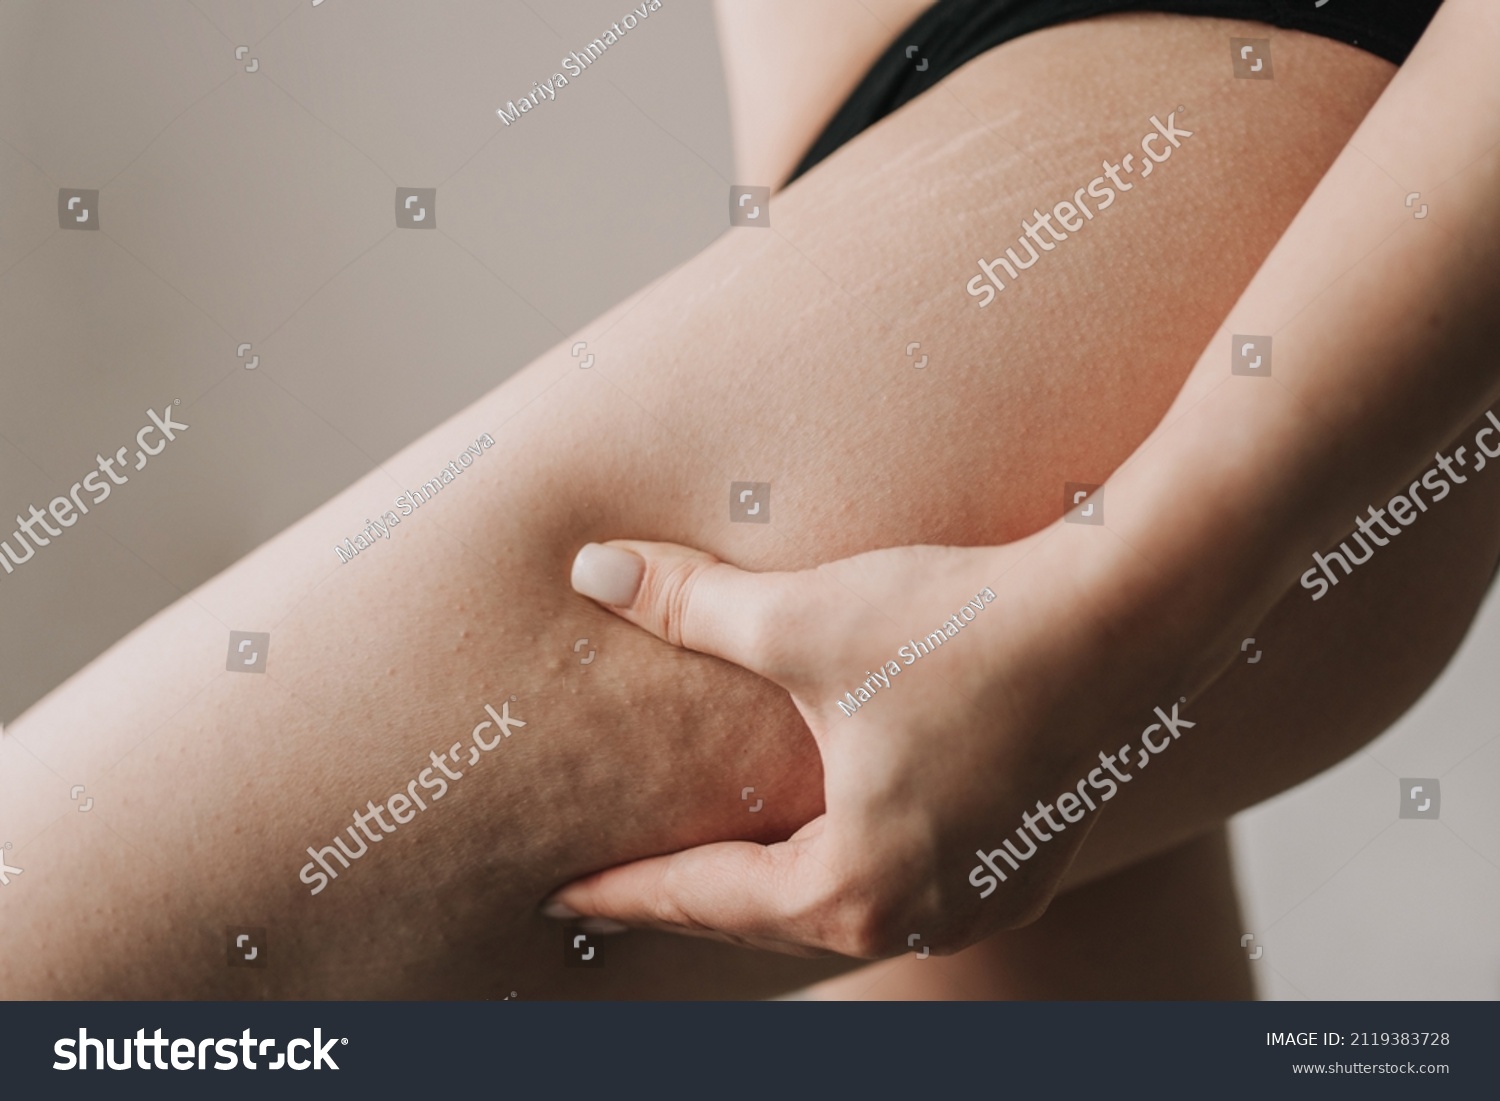 cellulite on the skin close up #2119383728